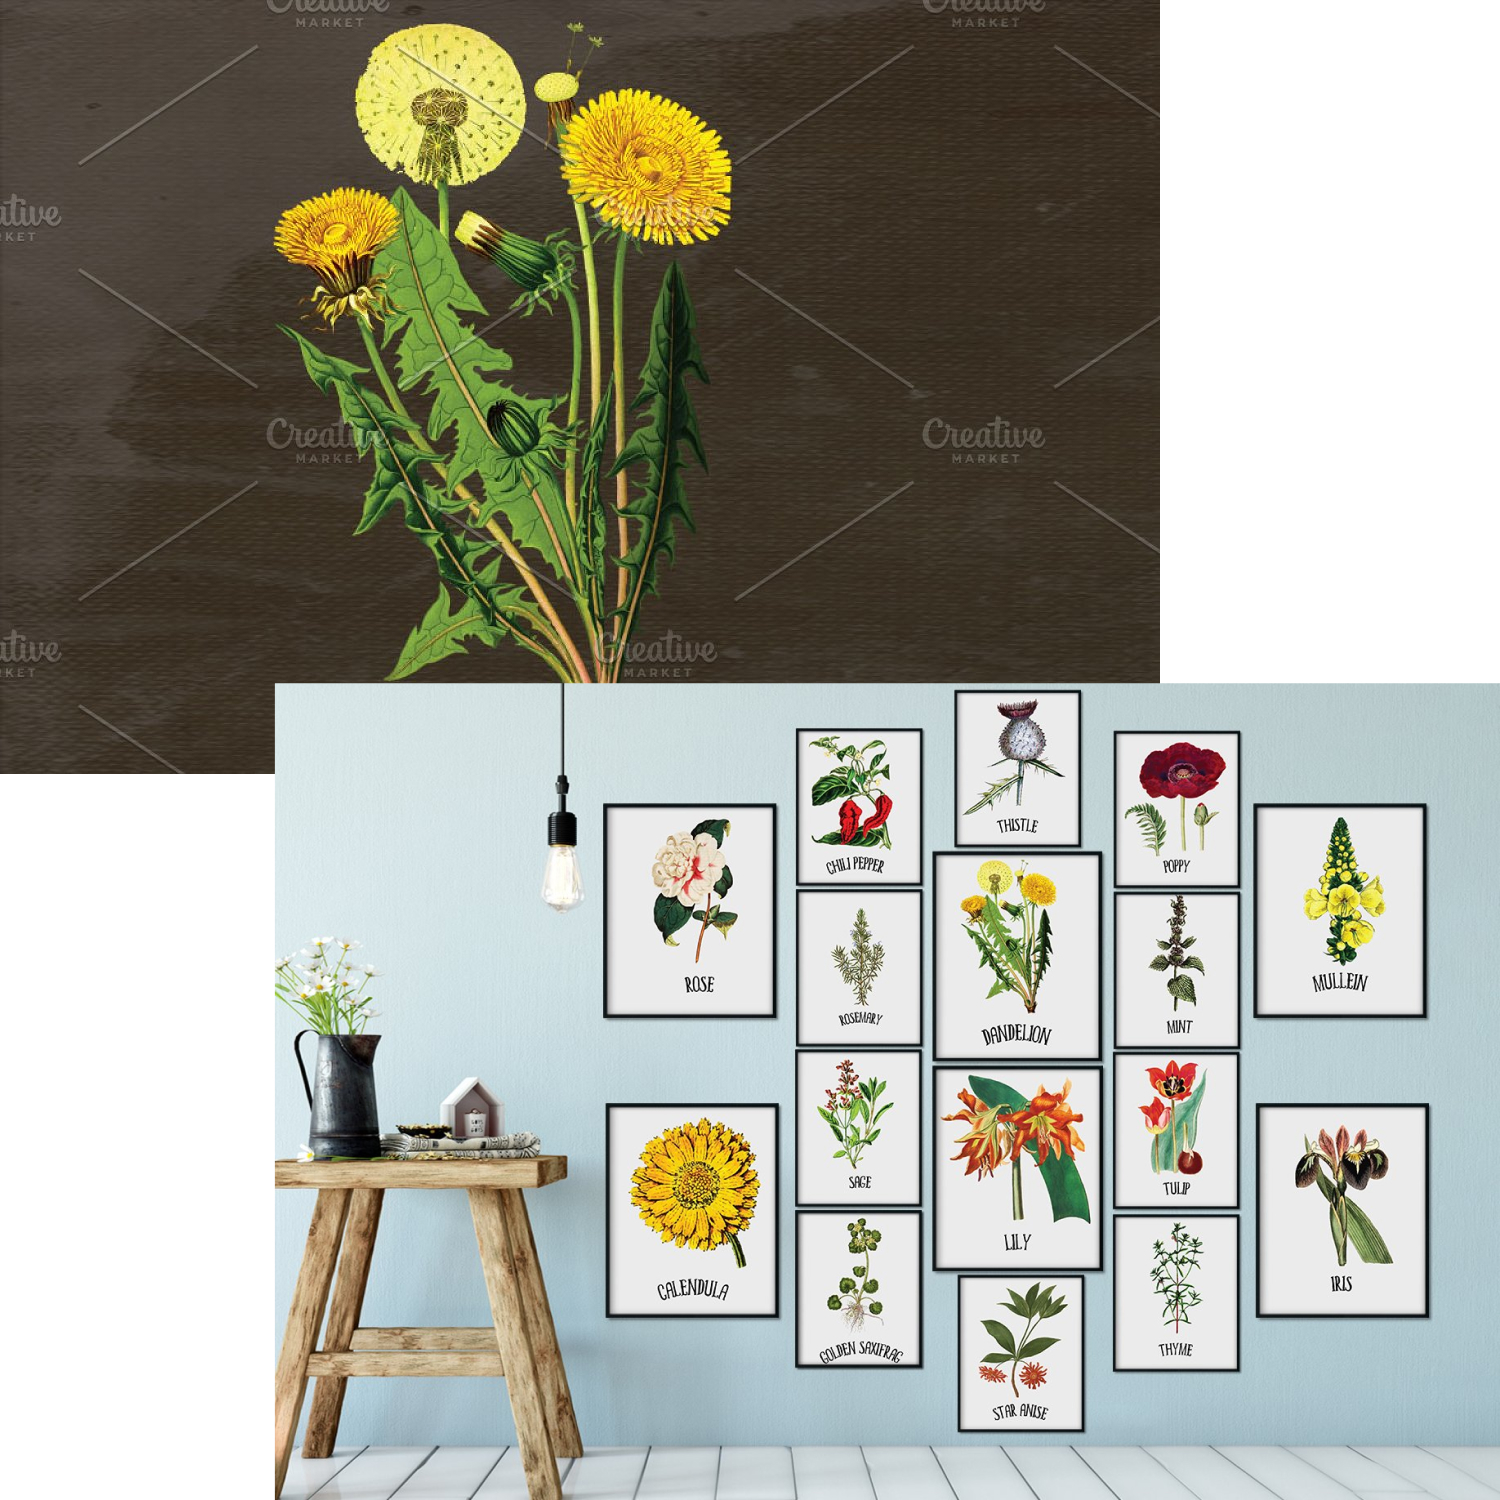 Cool print with the image of dandelions.